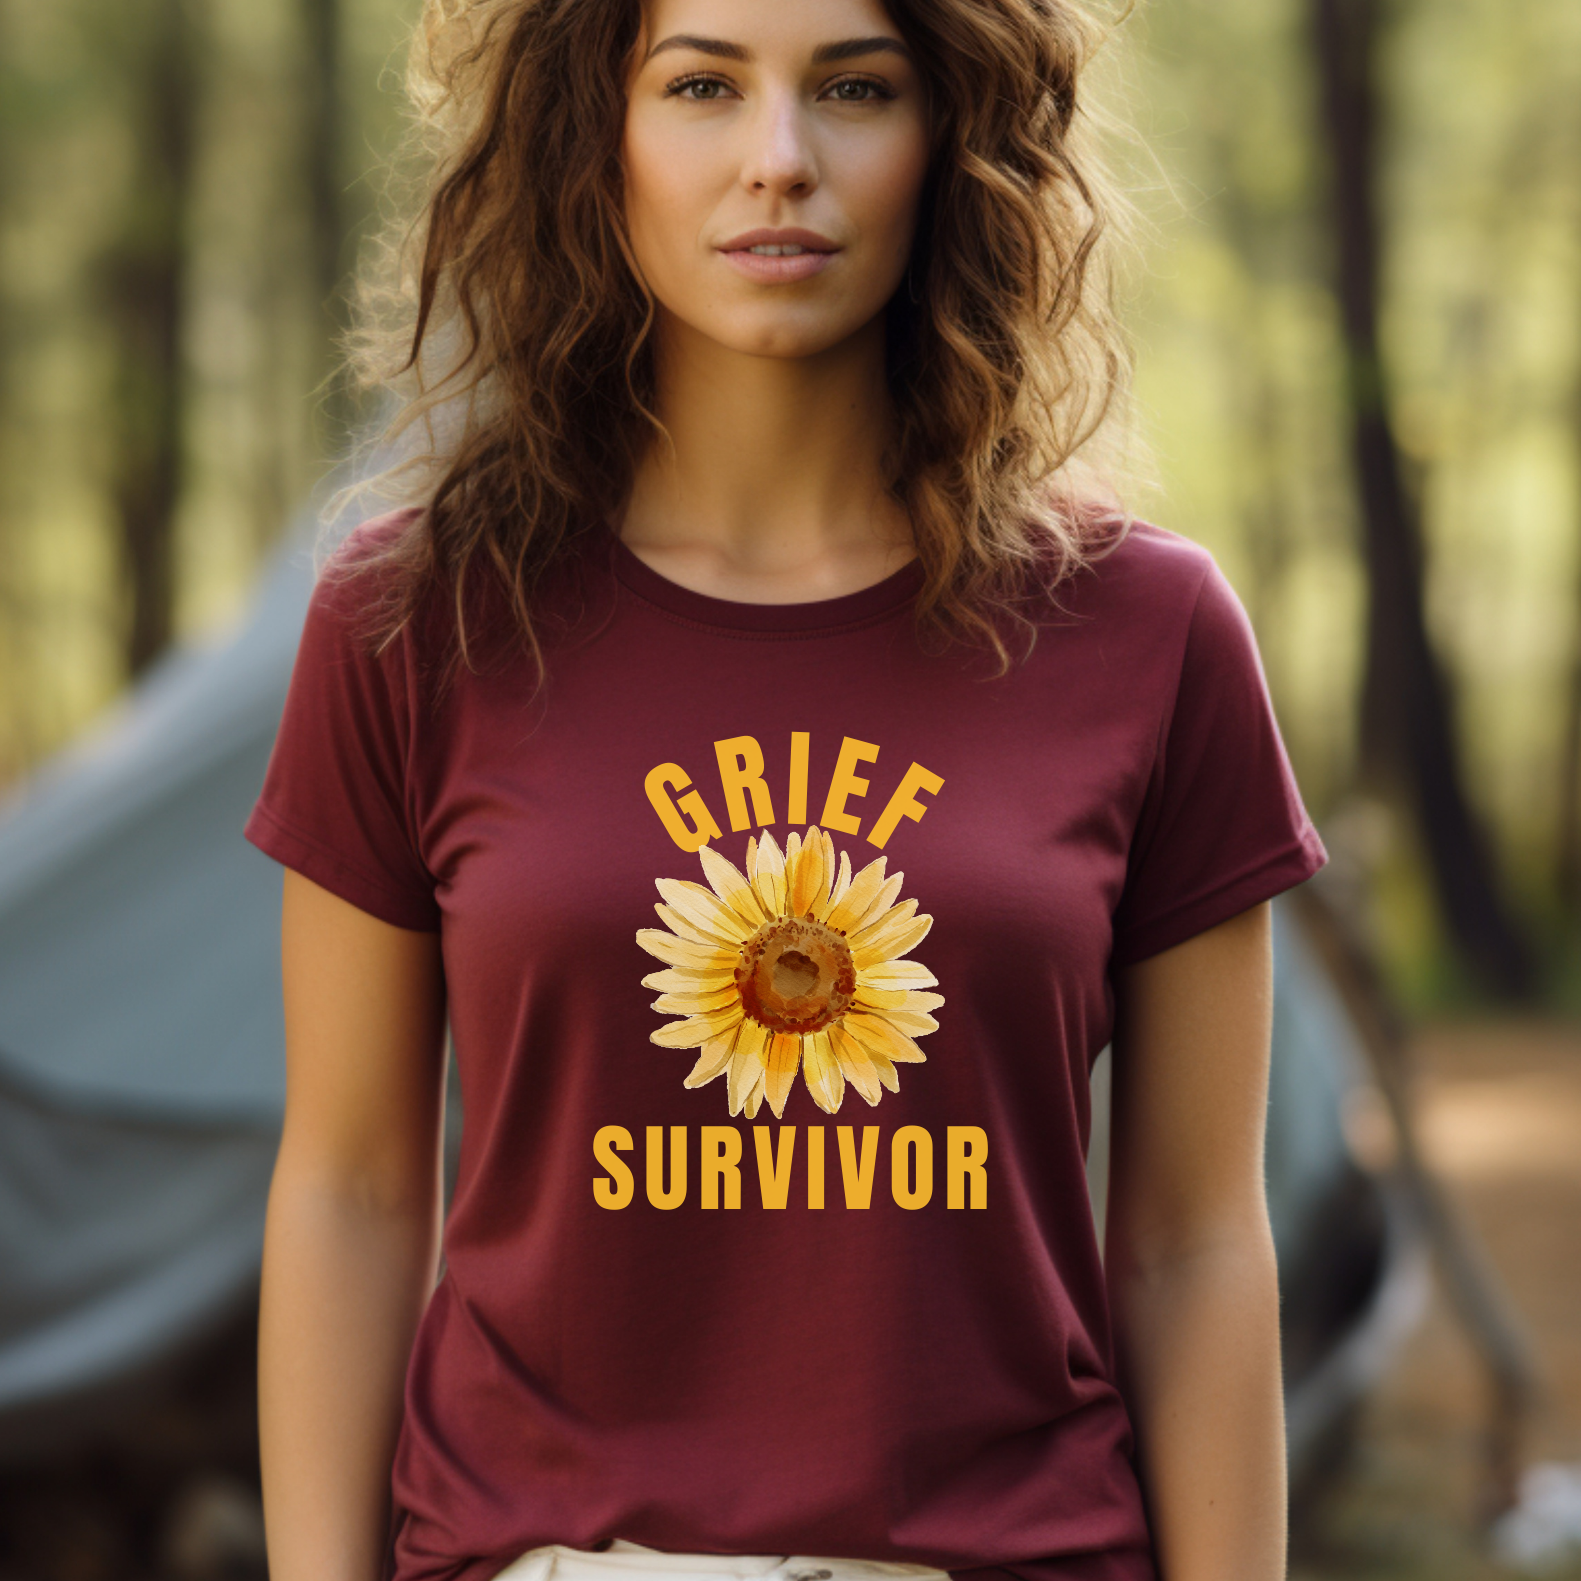 Maroon BC 3001 t-shirt, designed especially for someone in the throes of grief, who feels that most days they are simply surviving. The message conveys this simple truth: surviving is enough for now, and is a first step to healing. 